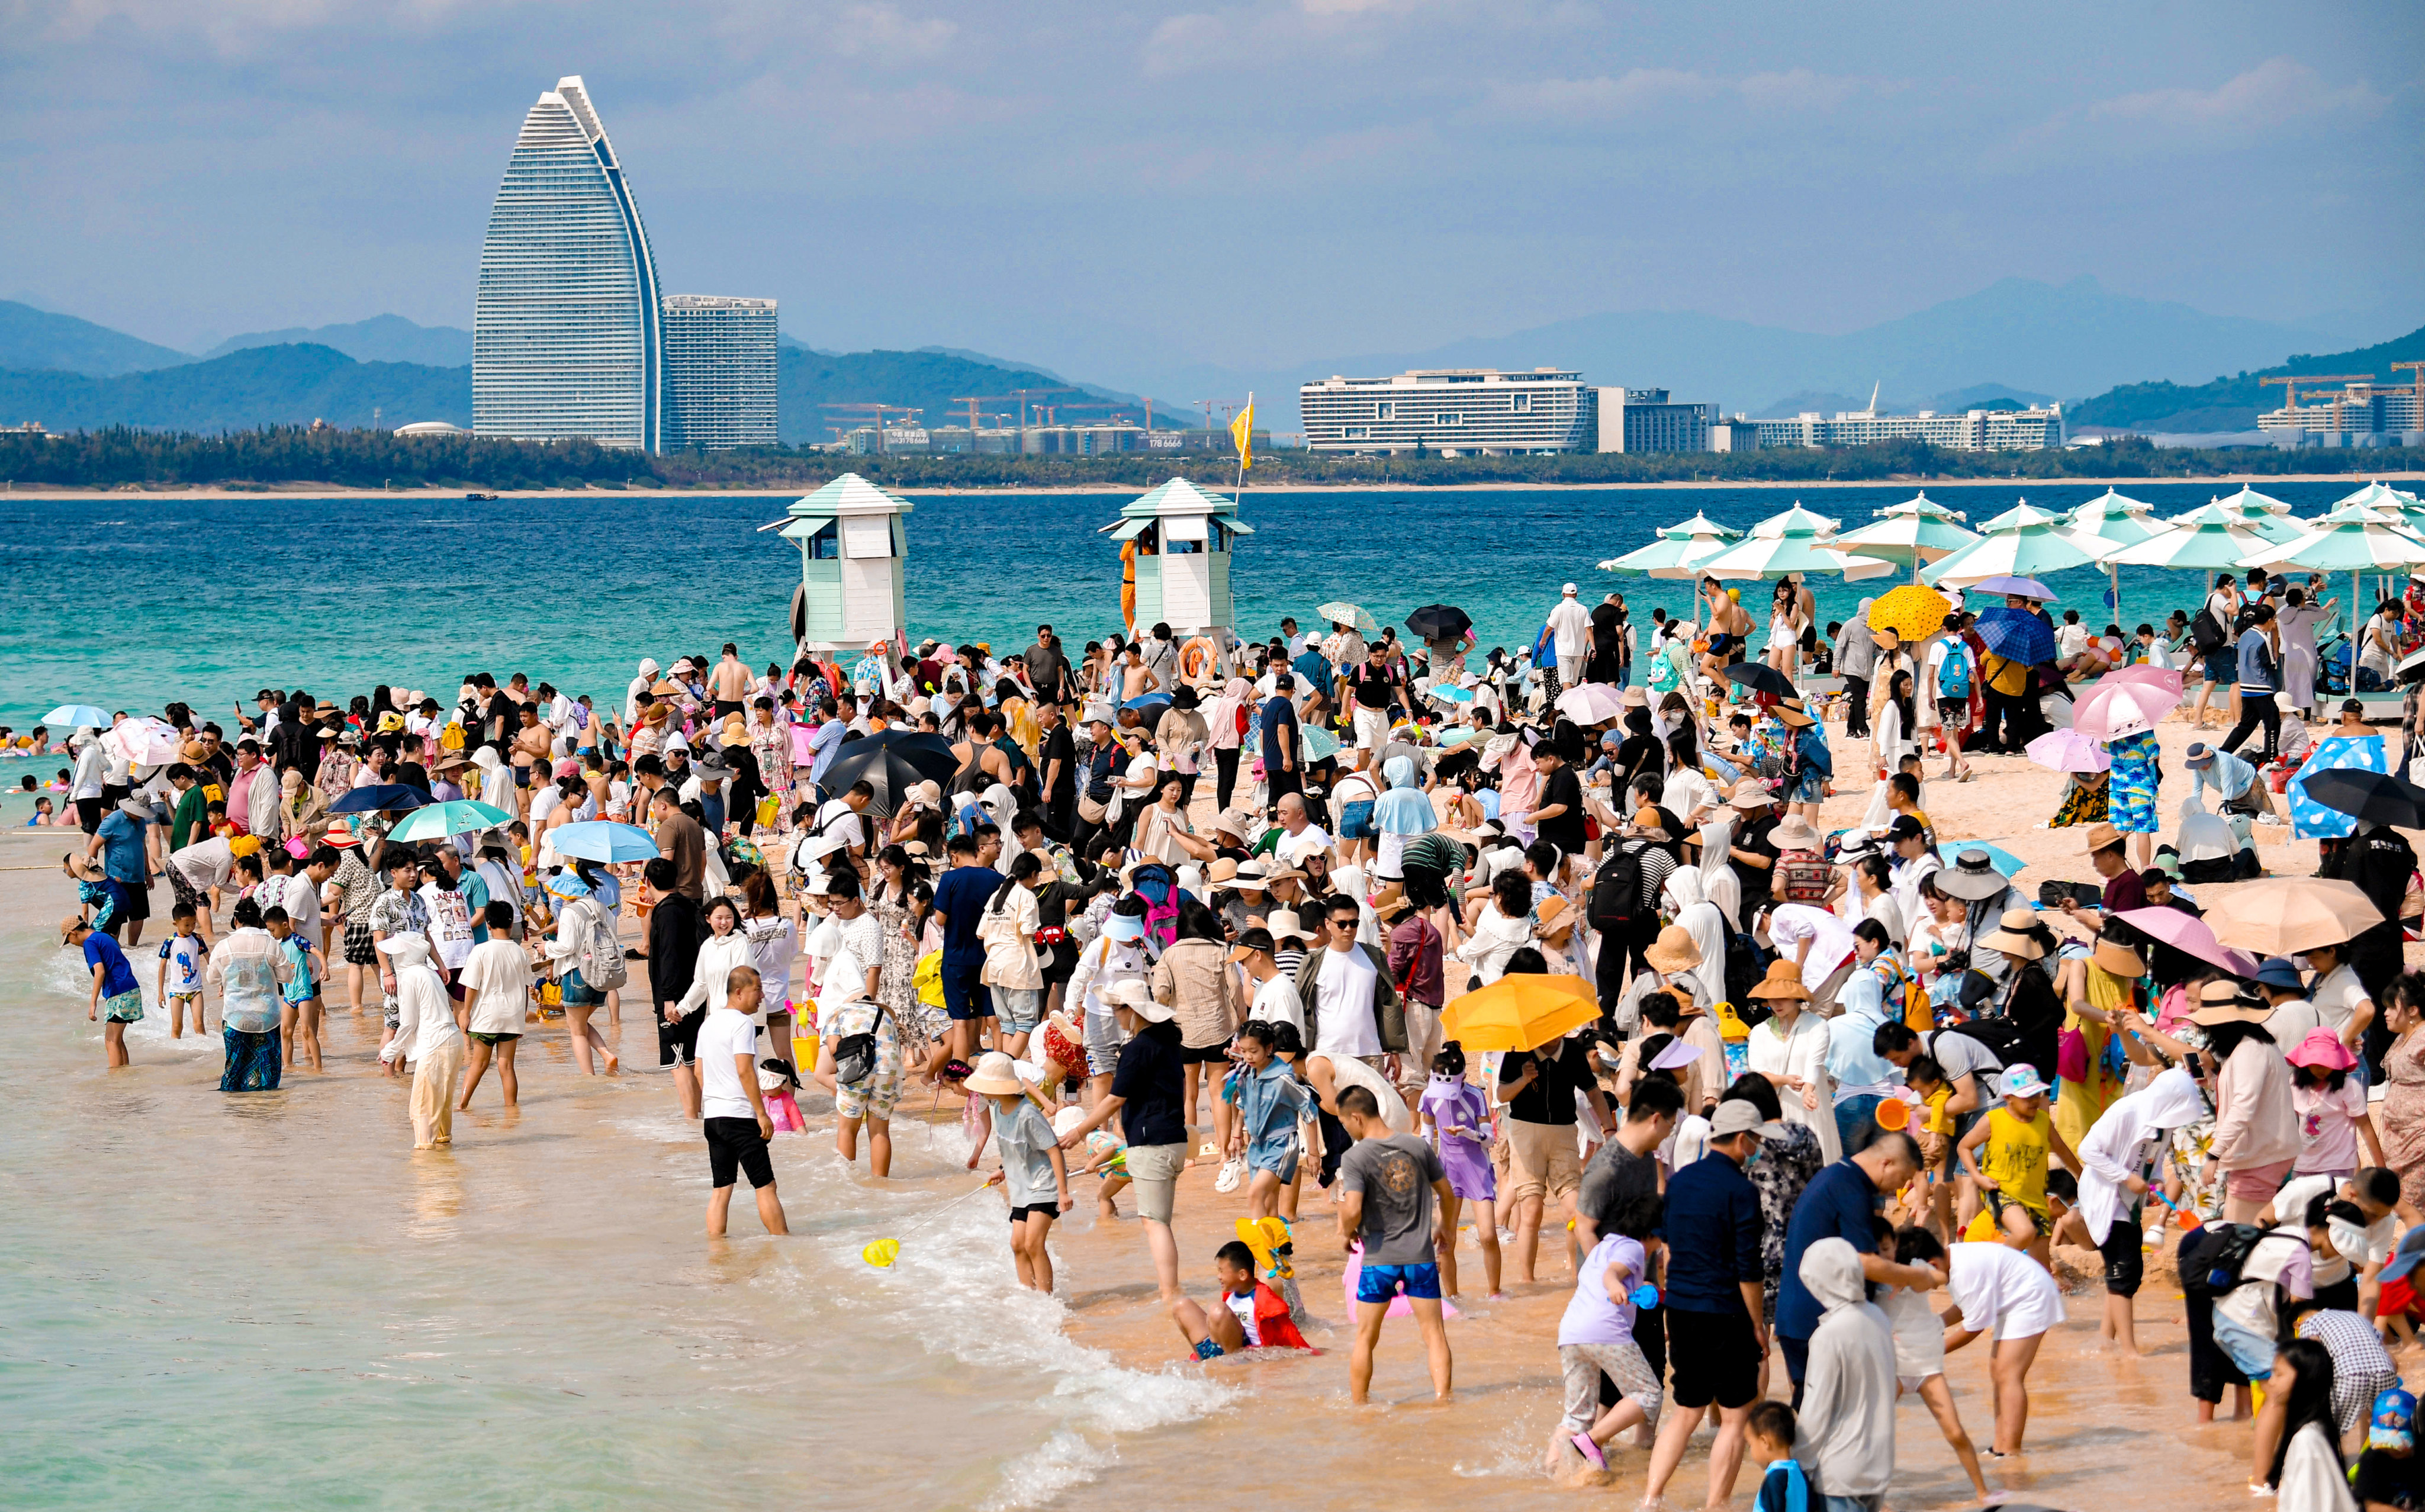 A crowded beach in Hainan earlier this month. Some travellers said they had been caught out by the high numbers travelling to the island, one of China’s main destinations. Photo: Xinhua